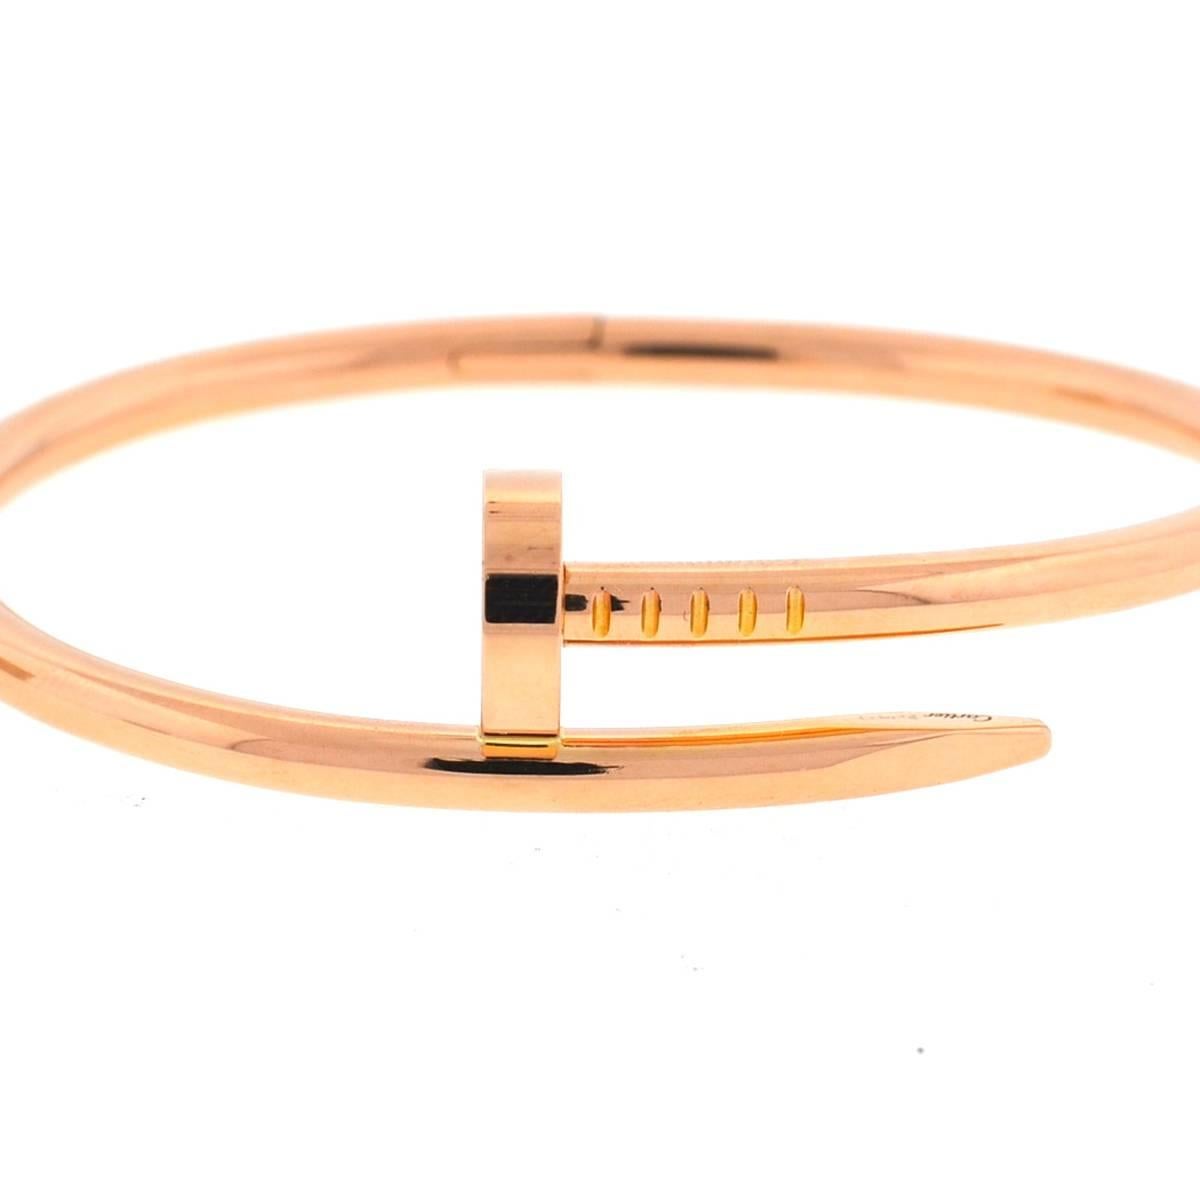 Company - Cartier
Style - Juste Un Clou
Metal - 18k Rose Gold 
Size - 16
Includes - Bracelet only
8693-1teee